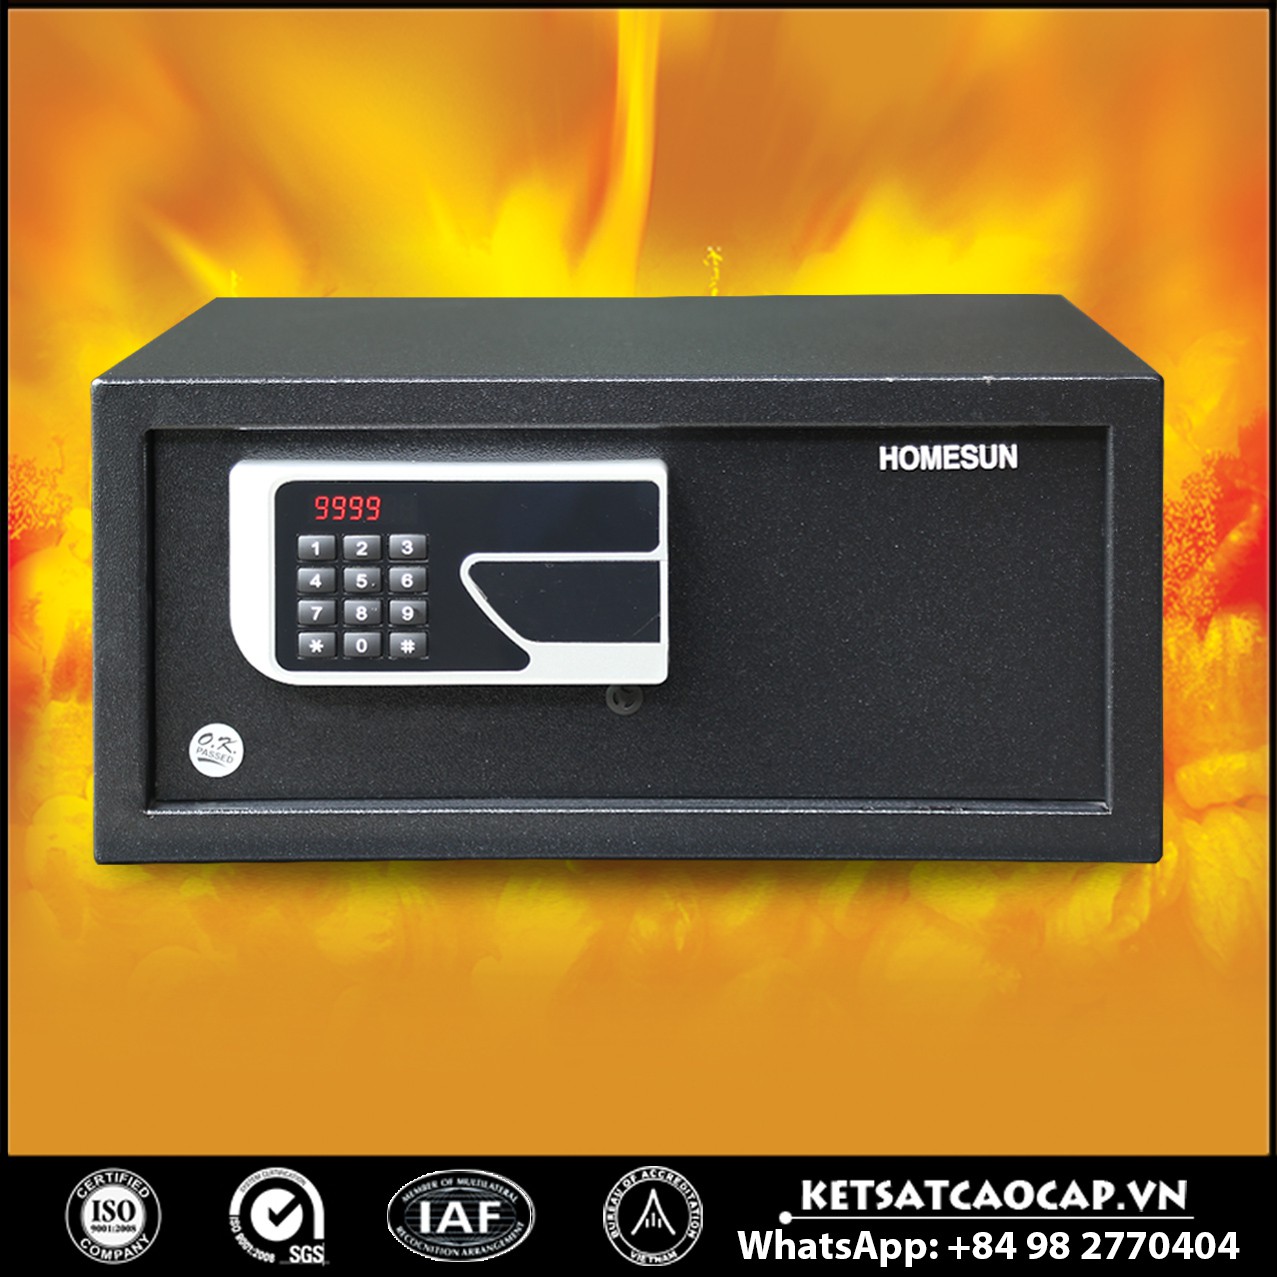 Safes in Hotel Manufacturers